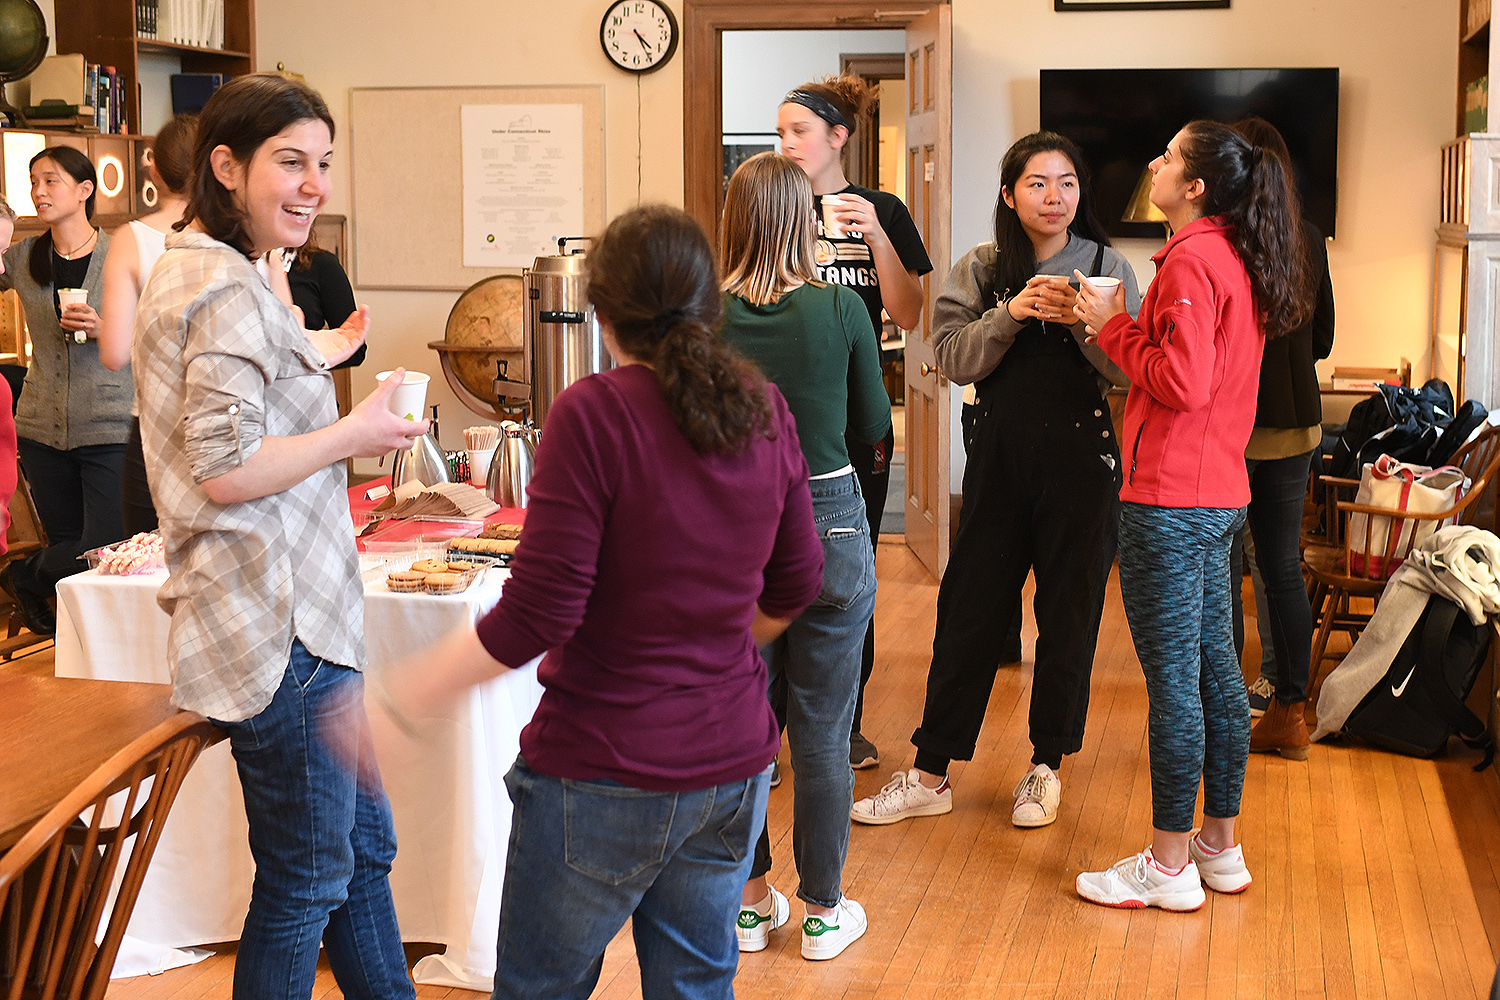 On Feb. 15, the Wesleyan Women in Science group hosted Student-Faculty Tea for WesWIS students and female science faculty. The event took place inside the Van Vleck Observatory's library. 